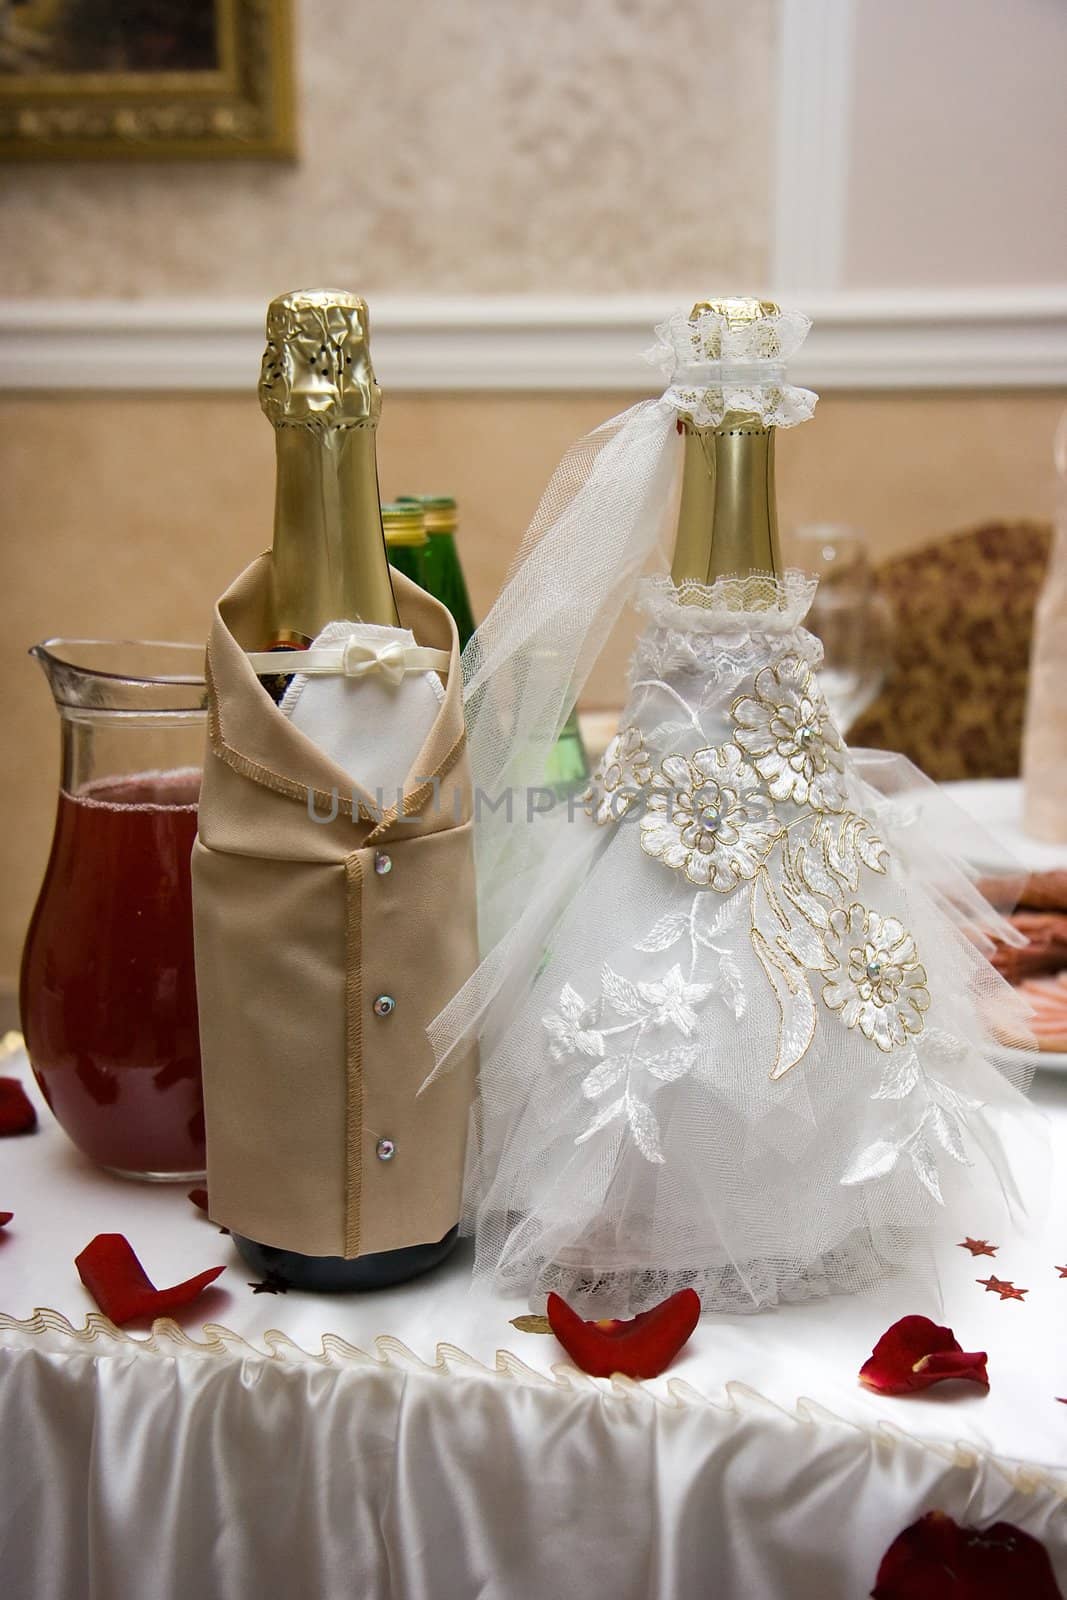 Wedding champagne stylised under the bride and the groom